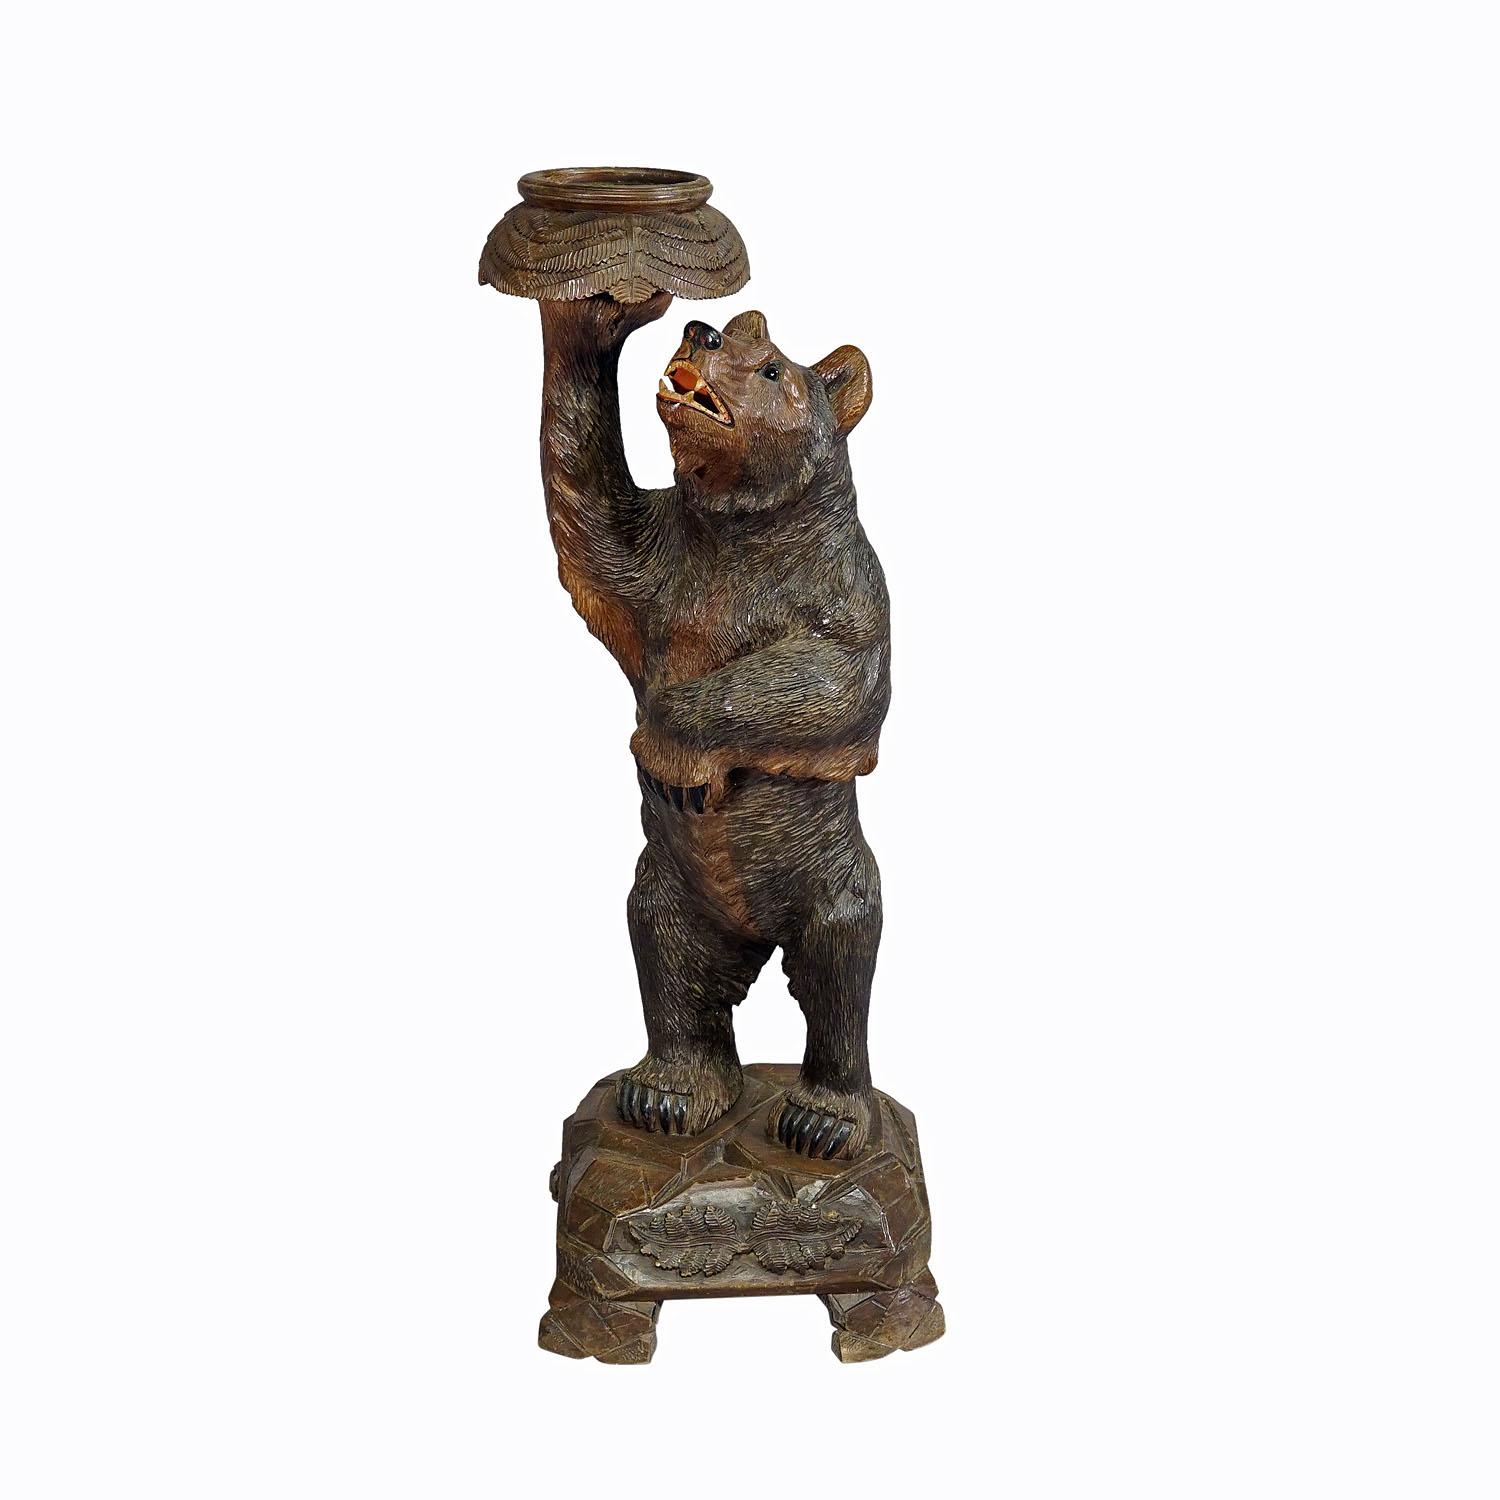 Large Wooden Black Forest Bear Flower Stand, Handcarved in Brienz 1900s

A antique statue of a standing bear flower stand. Made of lindenwood, finely handcarved with naturalistic details in Brienz, Switzerland ca. 1900s. A nice example of the famous